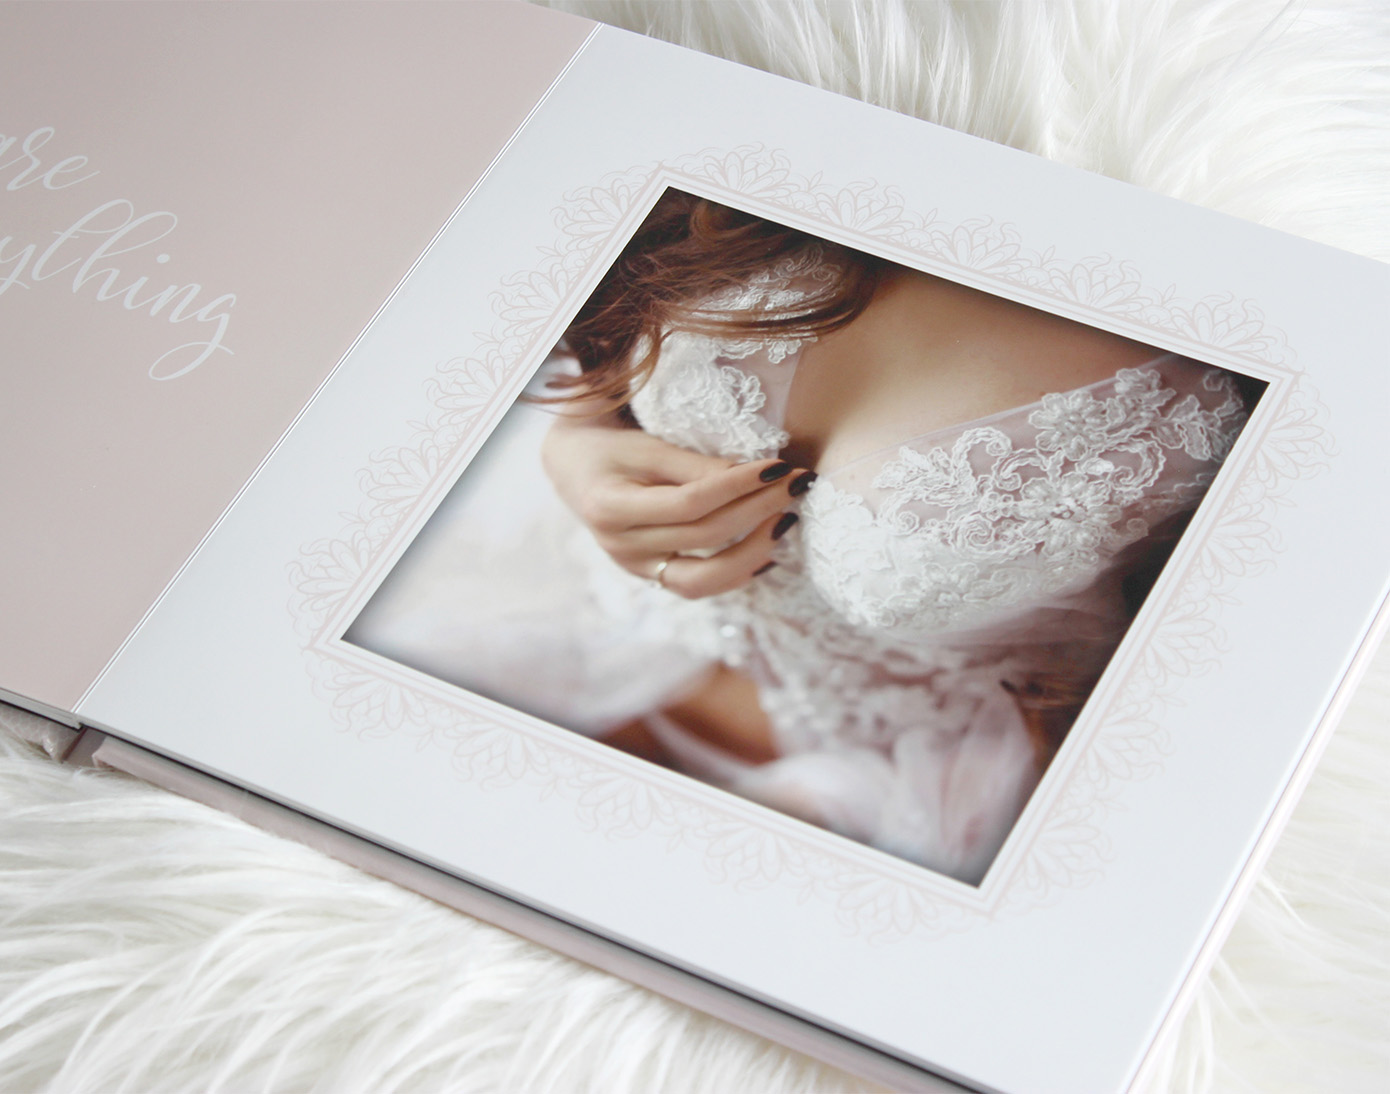 Our premium boudoir photo books, and boutique approach to printing books, give you a personal experience along with an archival quality book that we promise you’ll fall in love with.